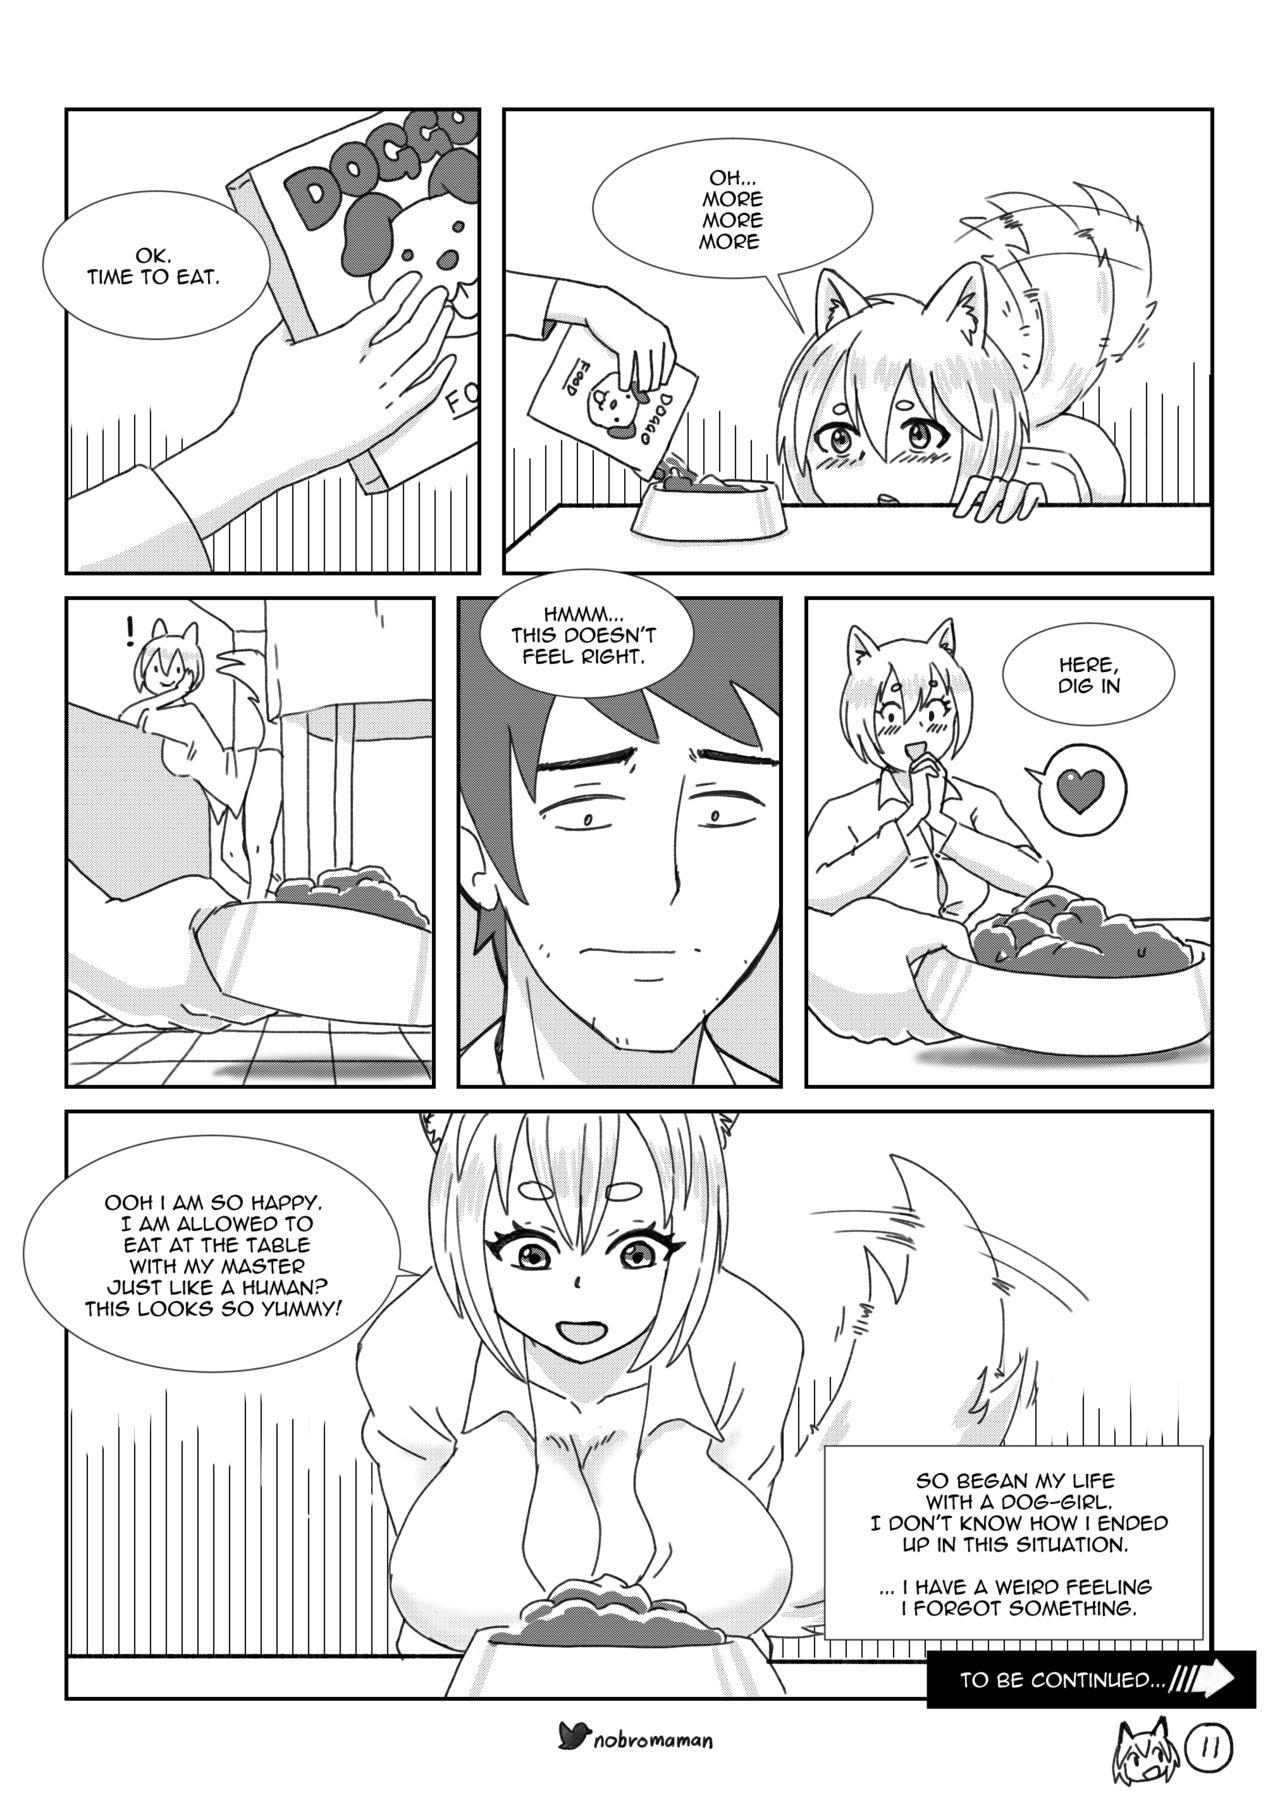 Ffm Life with a dog girl - Chapter1 Perfect Ass - Page 12